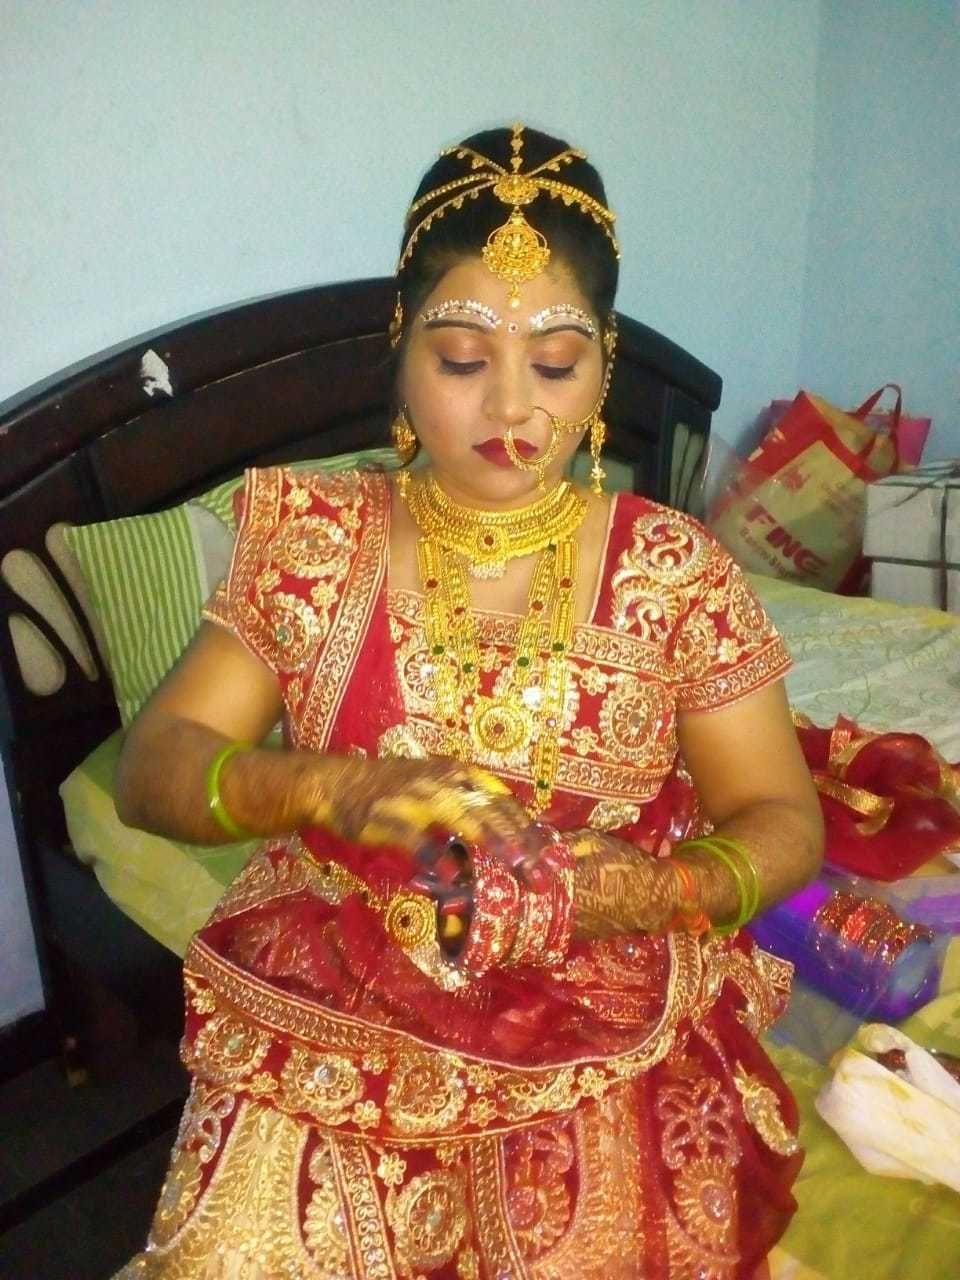 Photo From Bridal - By This Girl Does Makeup by Bhavna Thakur